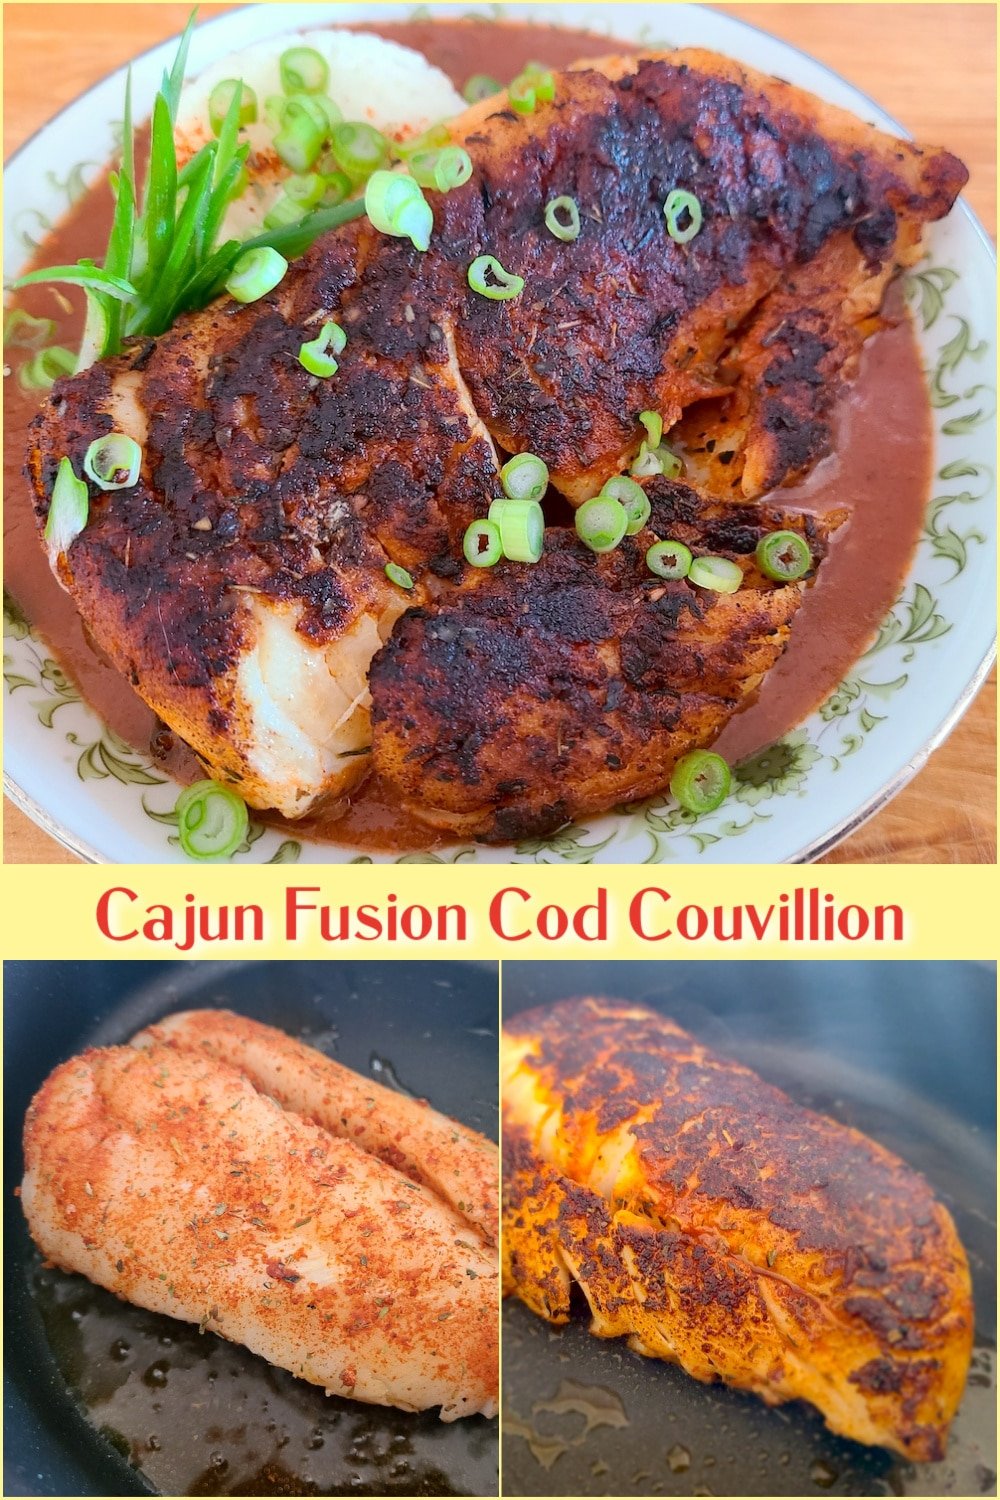 Cod Couvillion photo collage with title text added for Pinterest